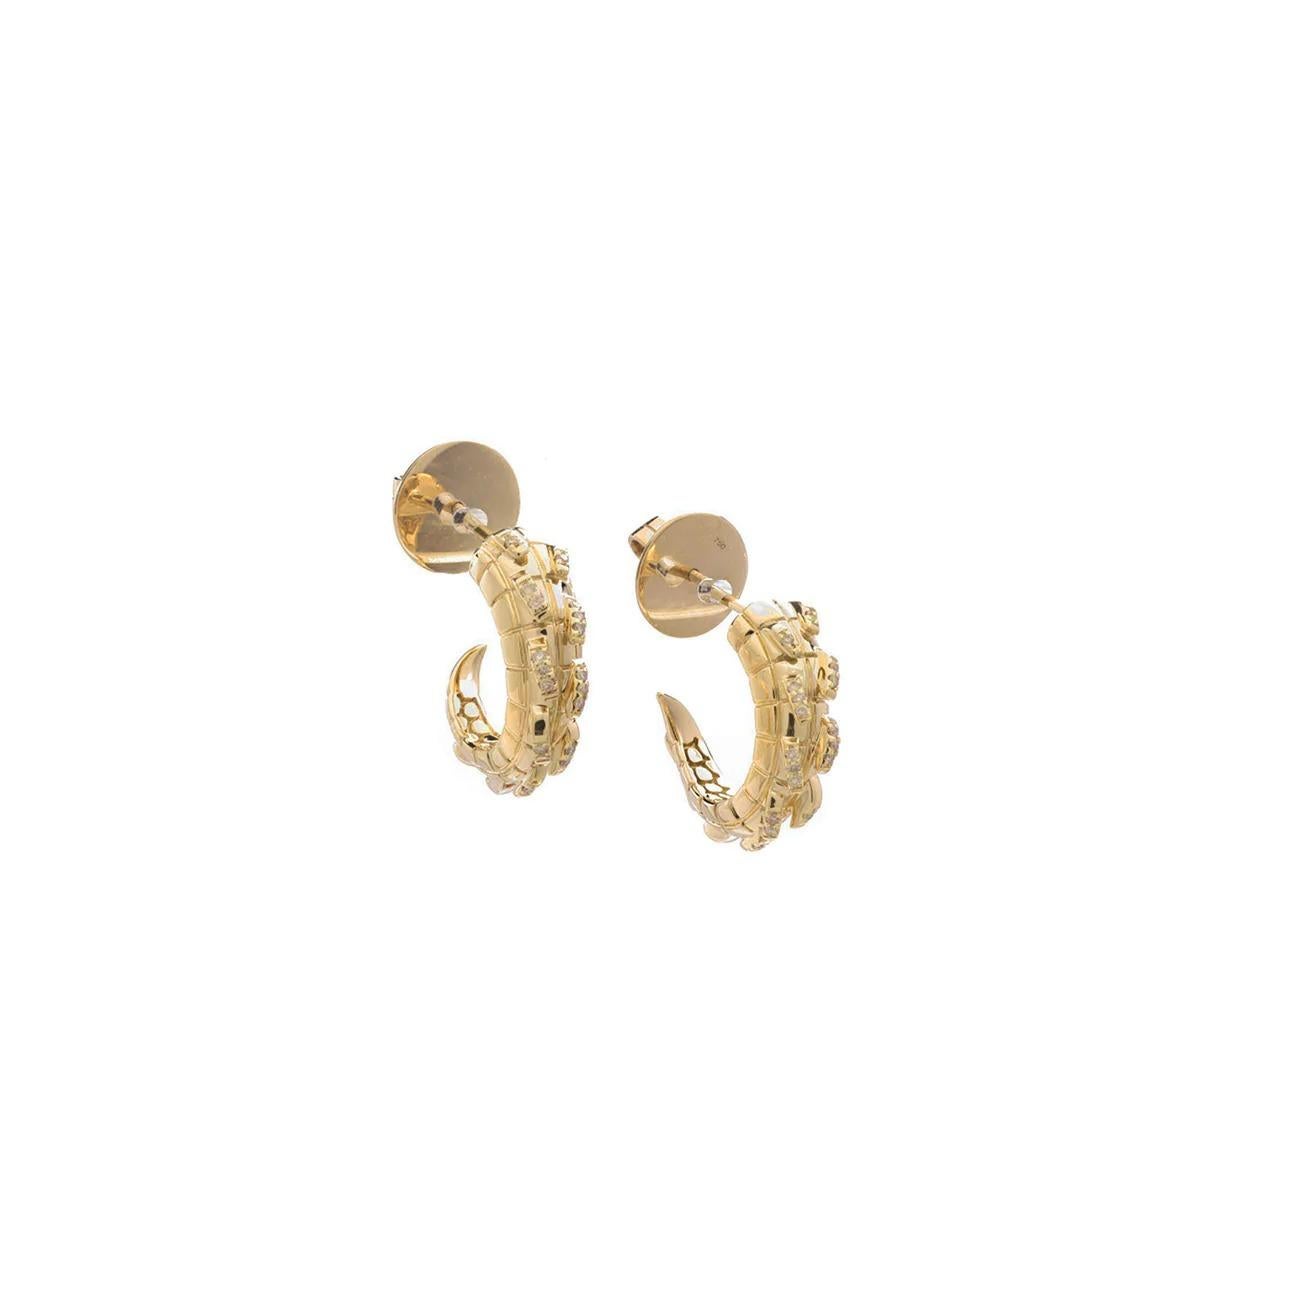 A sophisticated pair of hoops with a fierce edge. Embellished with exquisitely rare yellow diamonds for an elevated day to night look, these hoops bear all the subtle hallmarks of exceptional craftsmanship. A tapering, spiked tail and a subtle croc